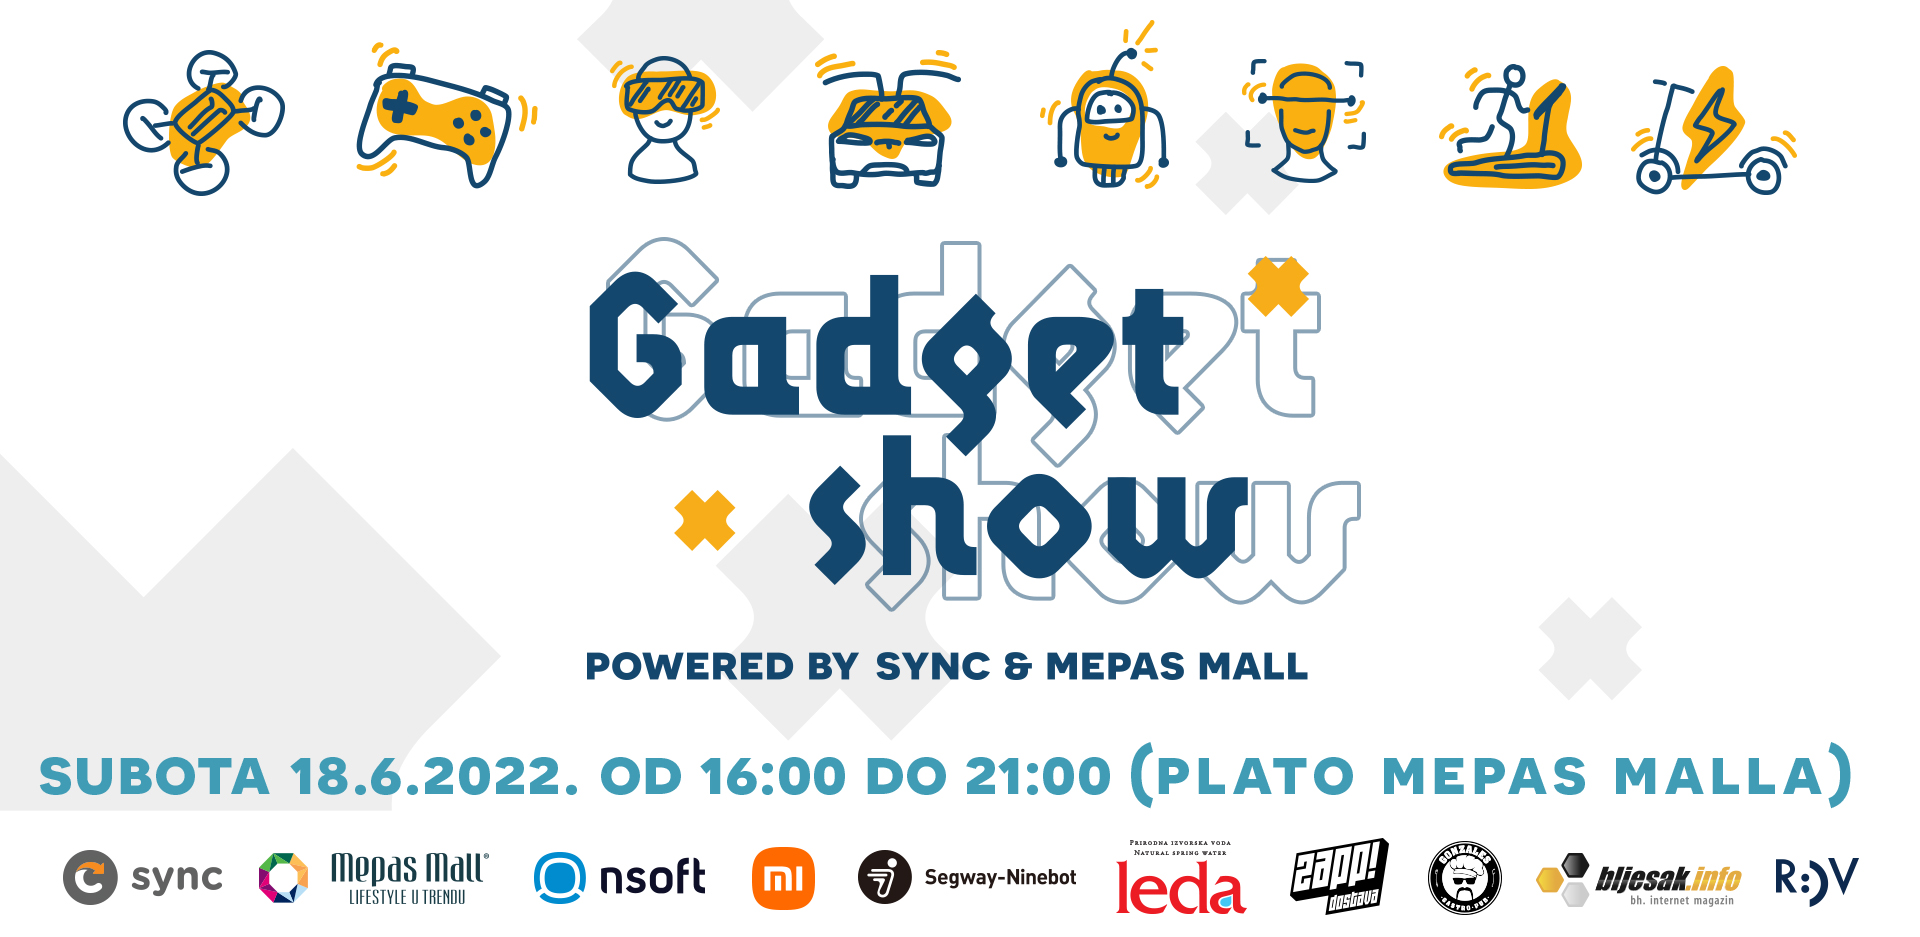 Gadget show powered by SYNC & Mepas Mall